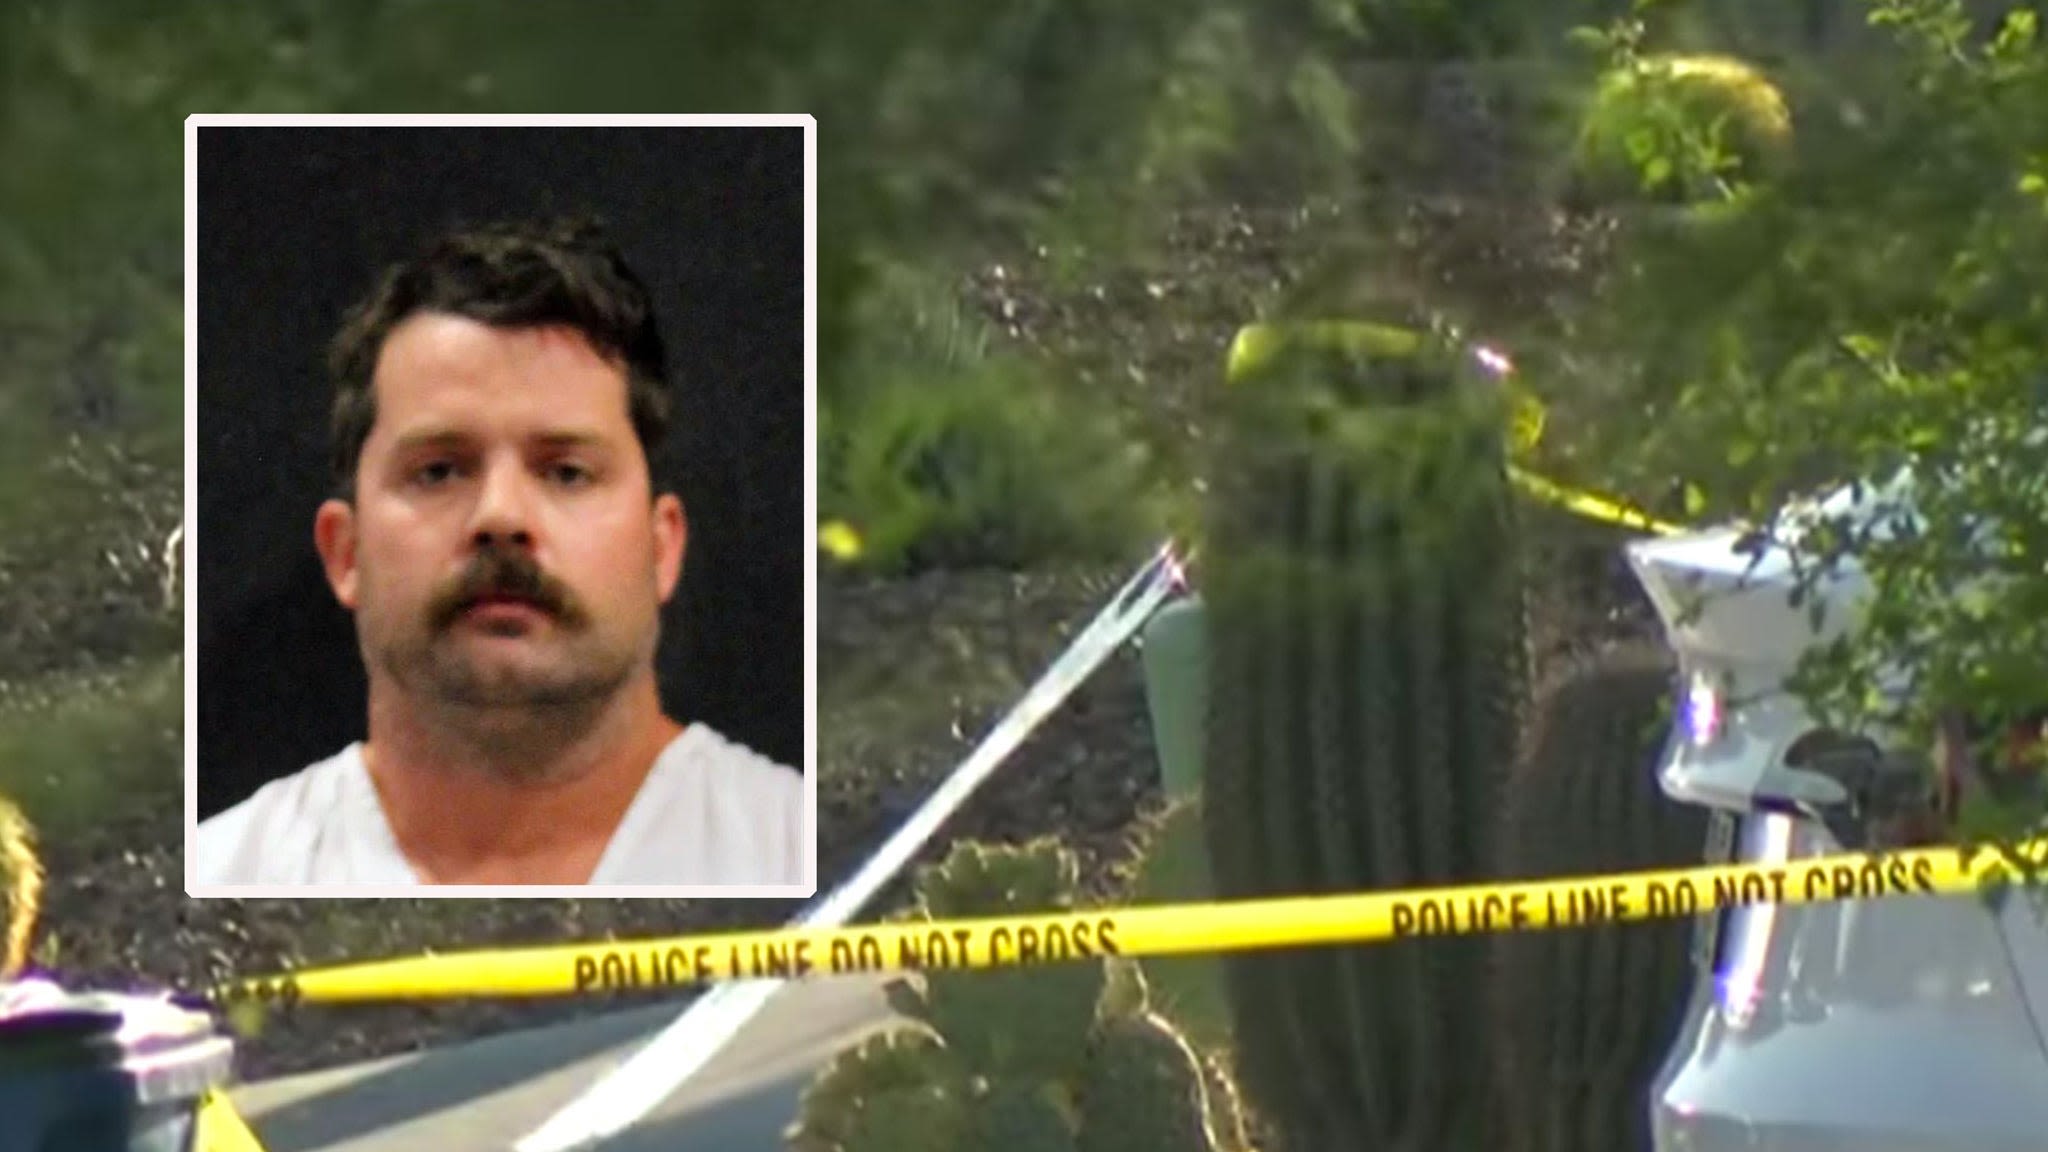 Arizona Dad 'Got Distracted' By Video Game While 2-Year-Old Child Died In Hot Car: Docs